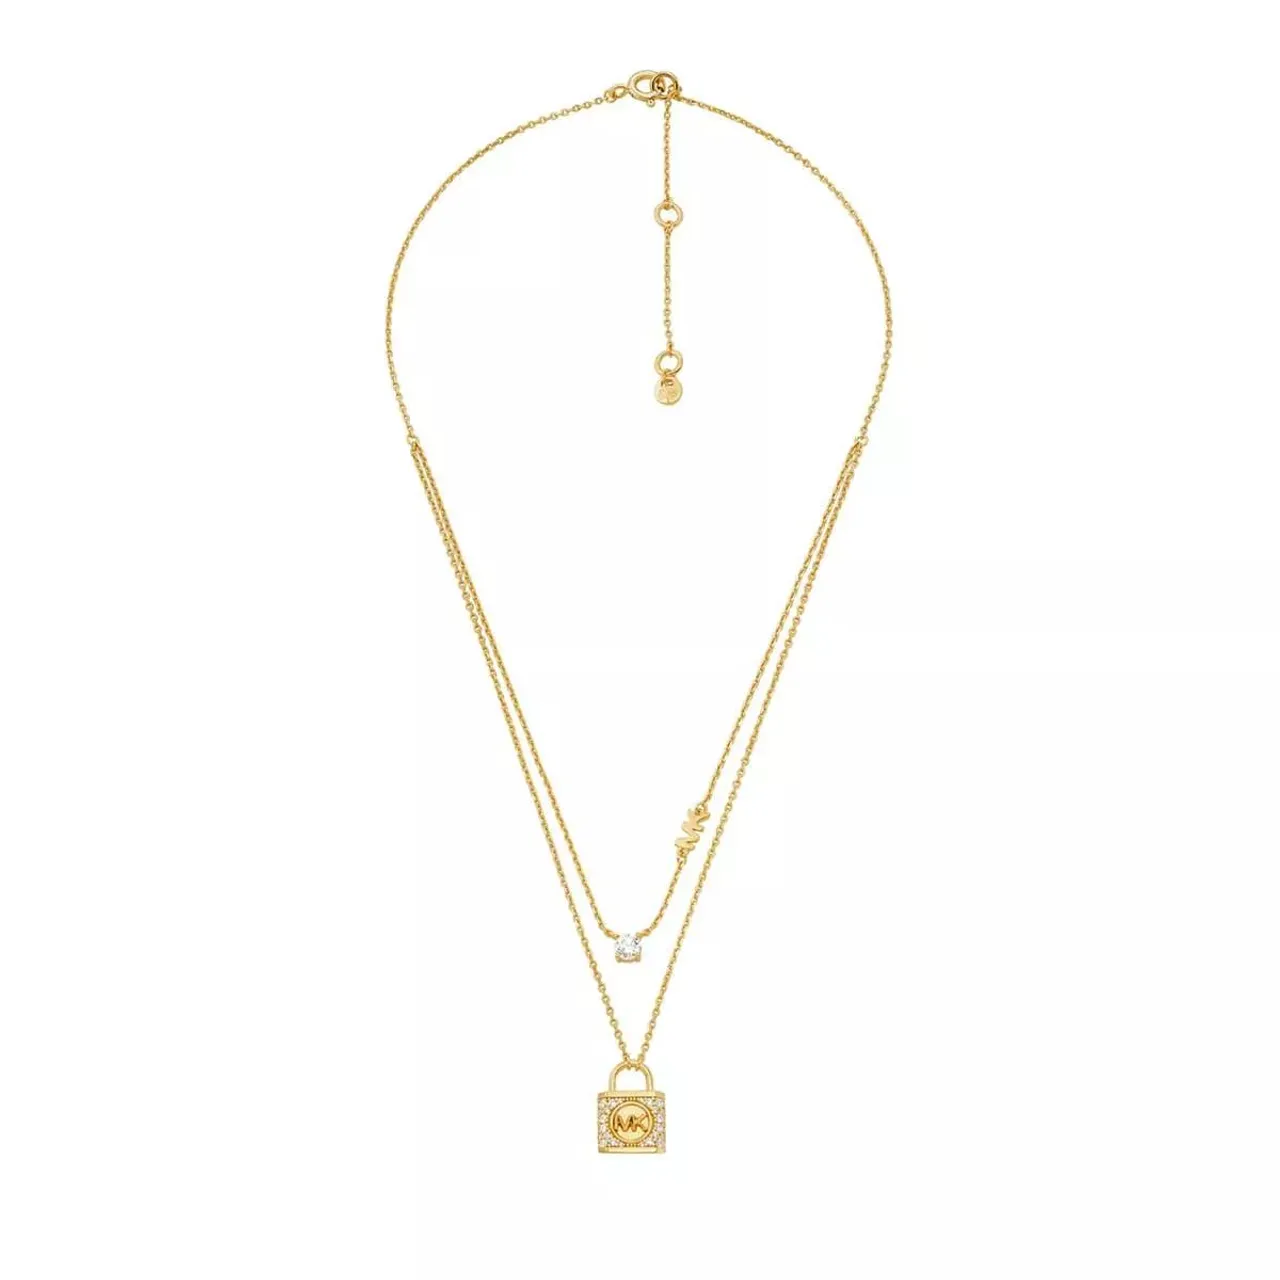 Michael Kors Necklaces - 14K Gold-Plated Sterling Silver Double Layered Pav - multi - Necklaces for ladies